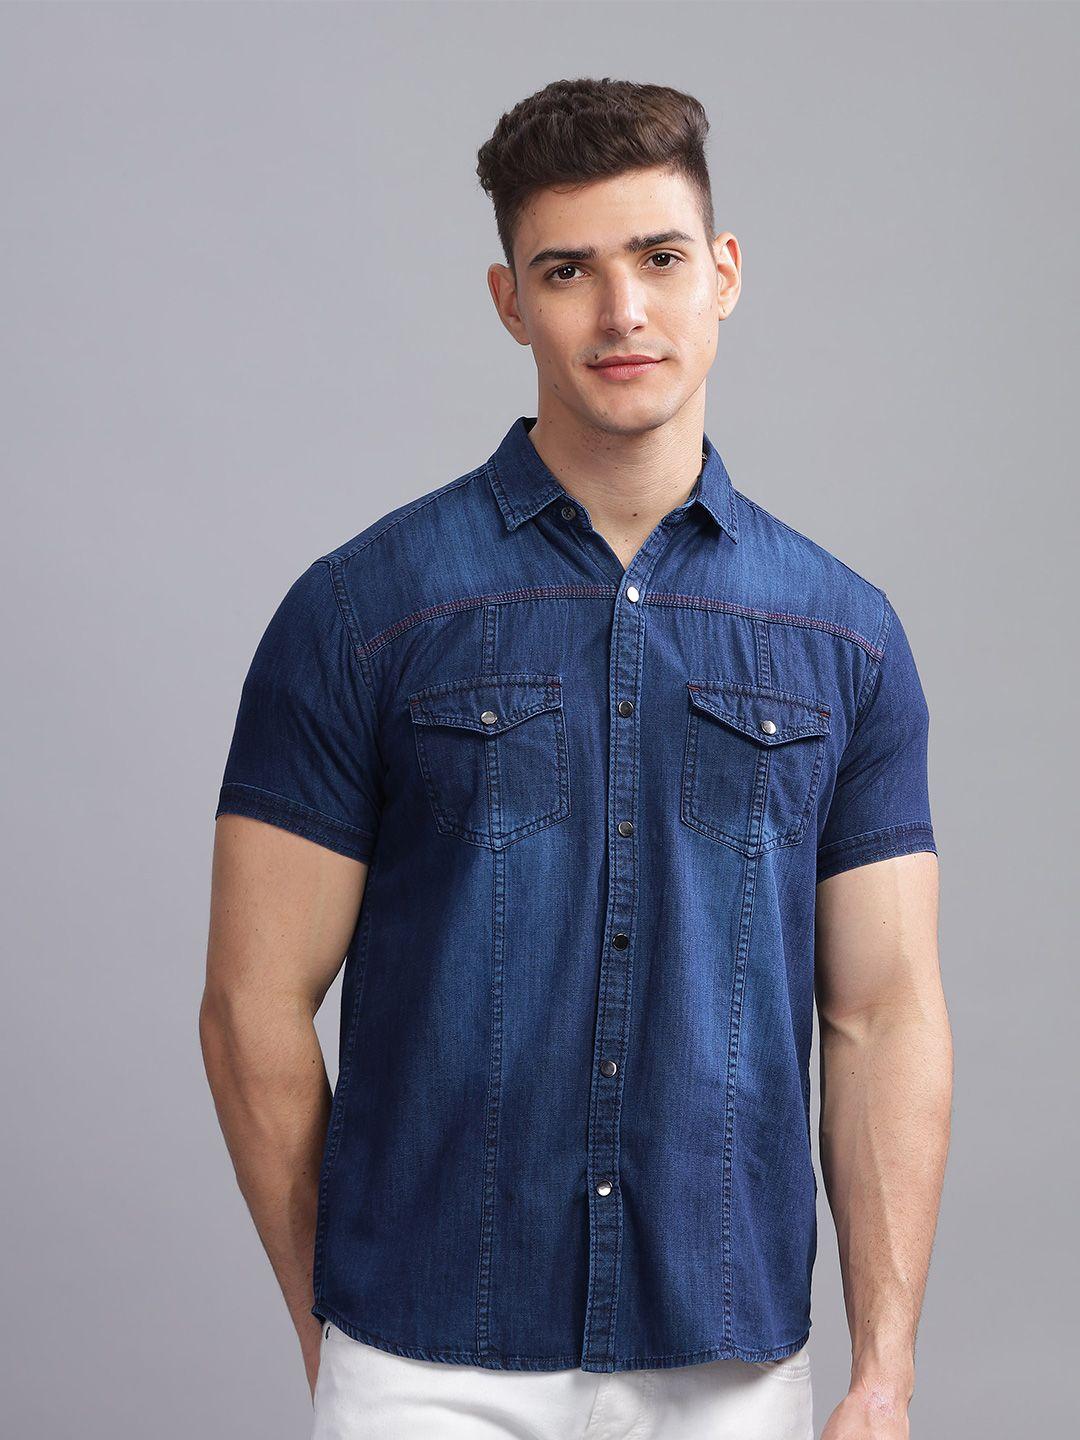 kuons avenue smart slim fit spread collar short sleeves casual shirt